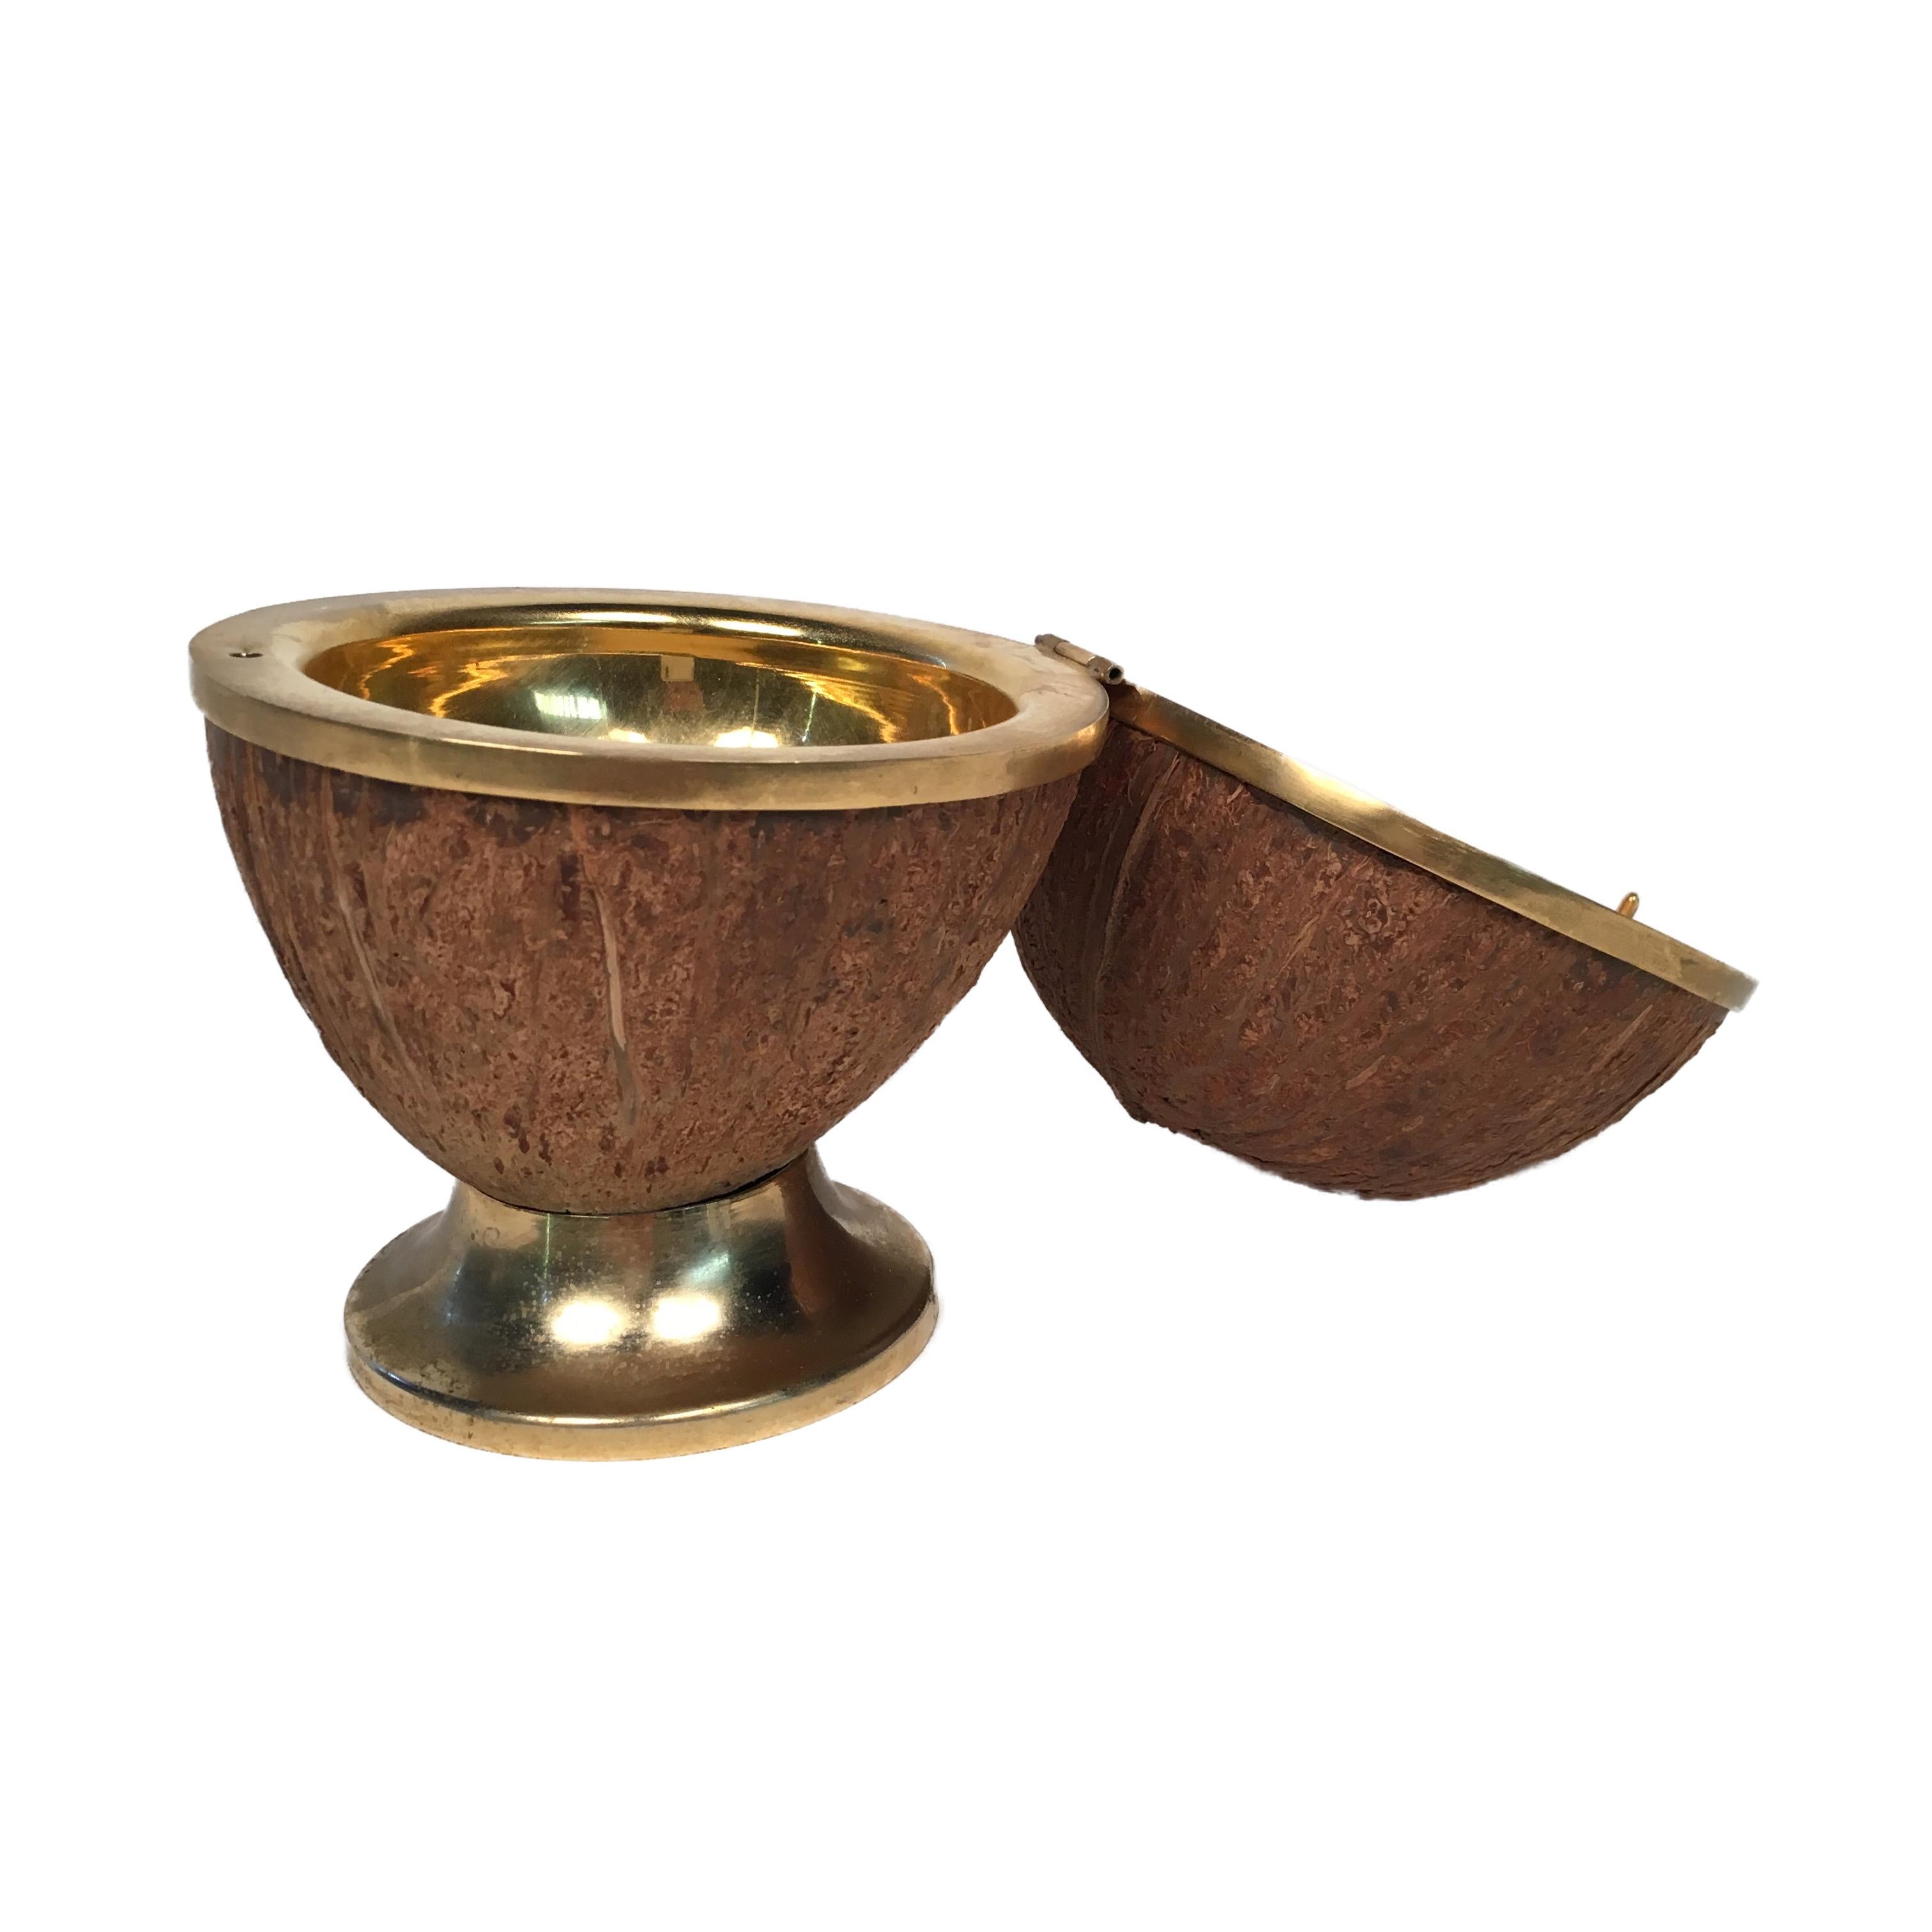 Italian Ashtray in Real Coconut and Brass, Mid-Century Modern